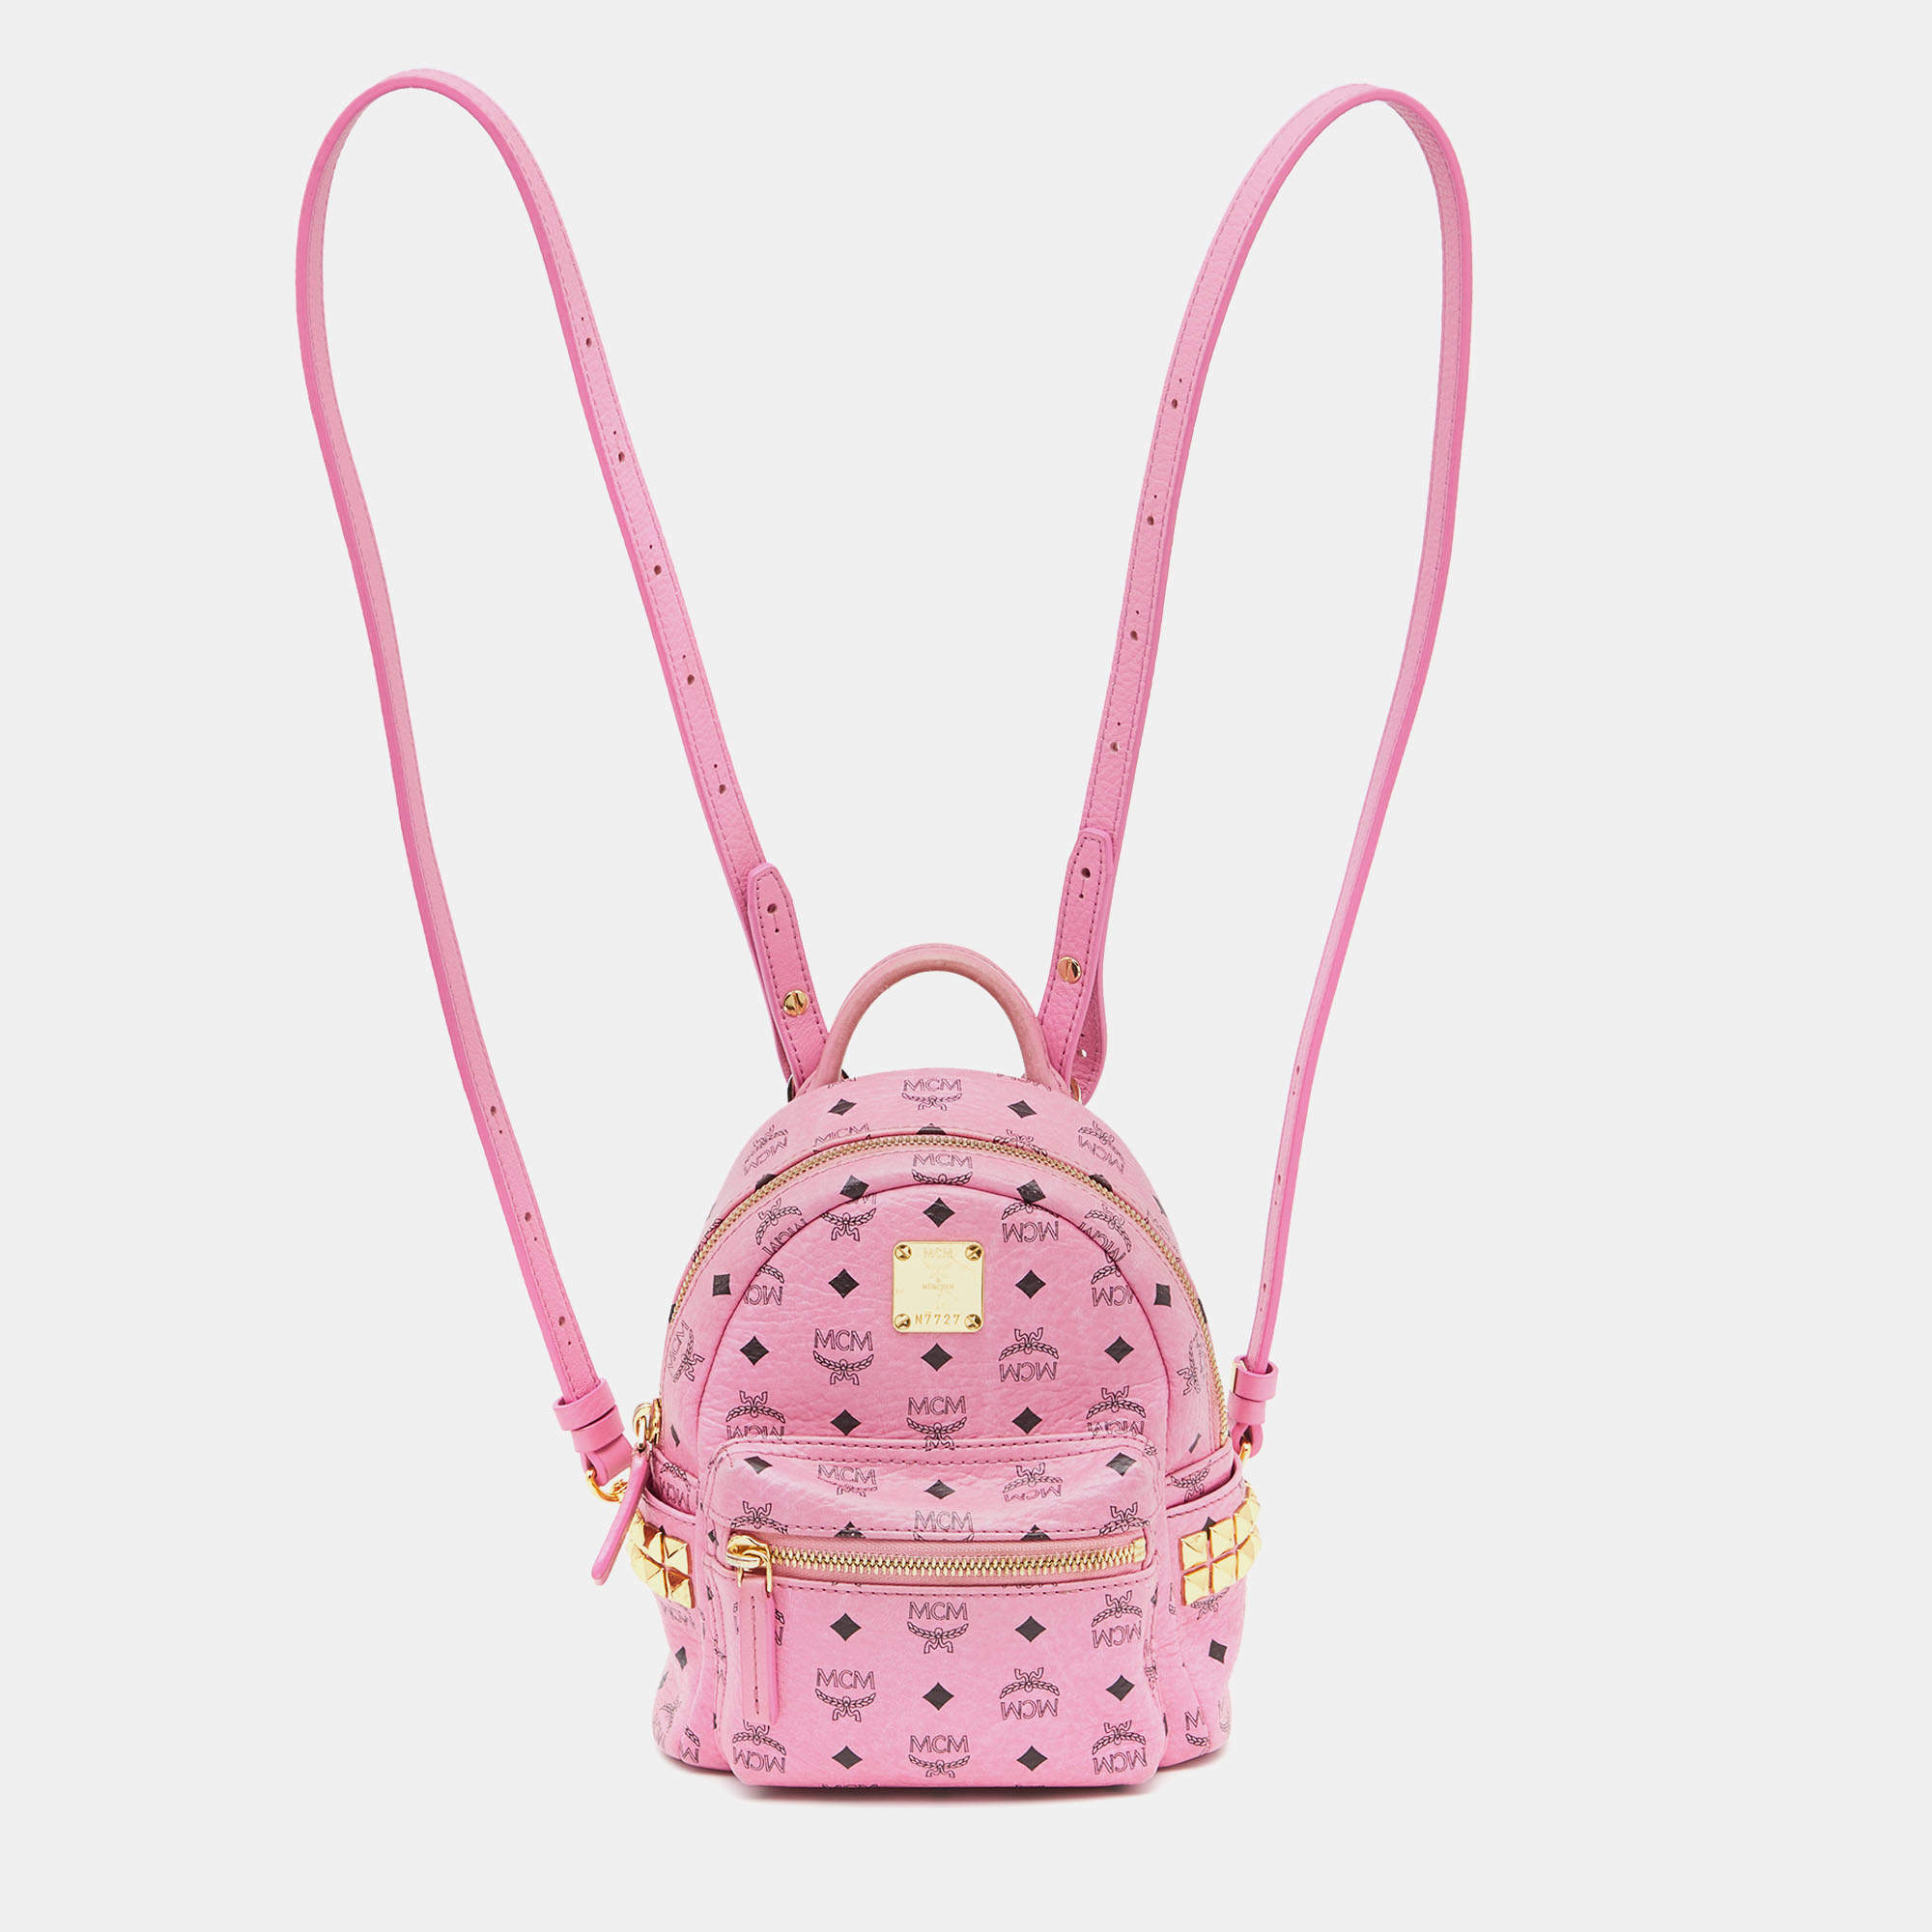 MCM Large Front Studded Stark Backpack in Pink